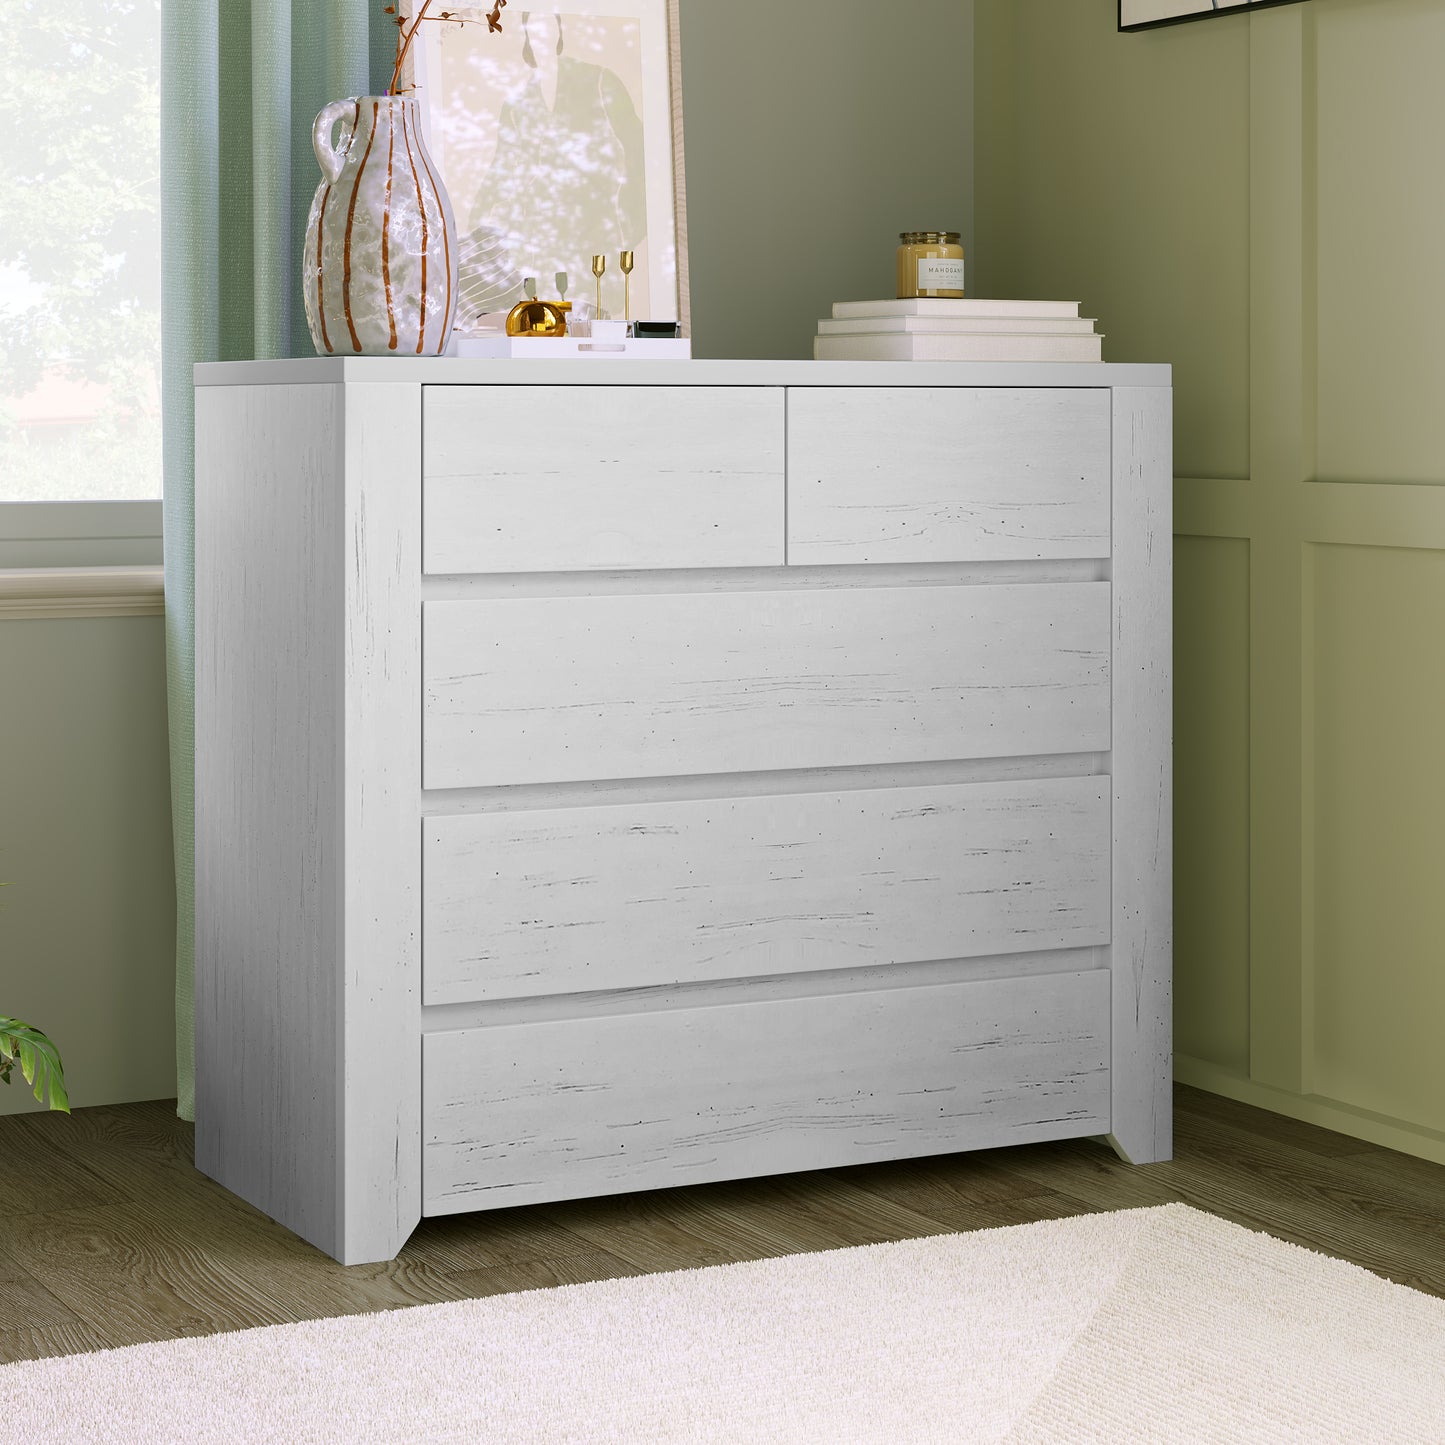 Off White Simple Style Manufacture Wood Chest with Gray Wood Grain Sticker Surfaces Five Drawers Large Storage Space for Living Room Bedroom Guest Room Children’s Room